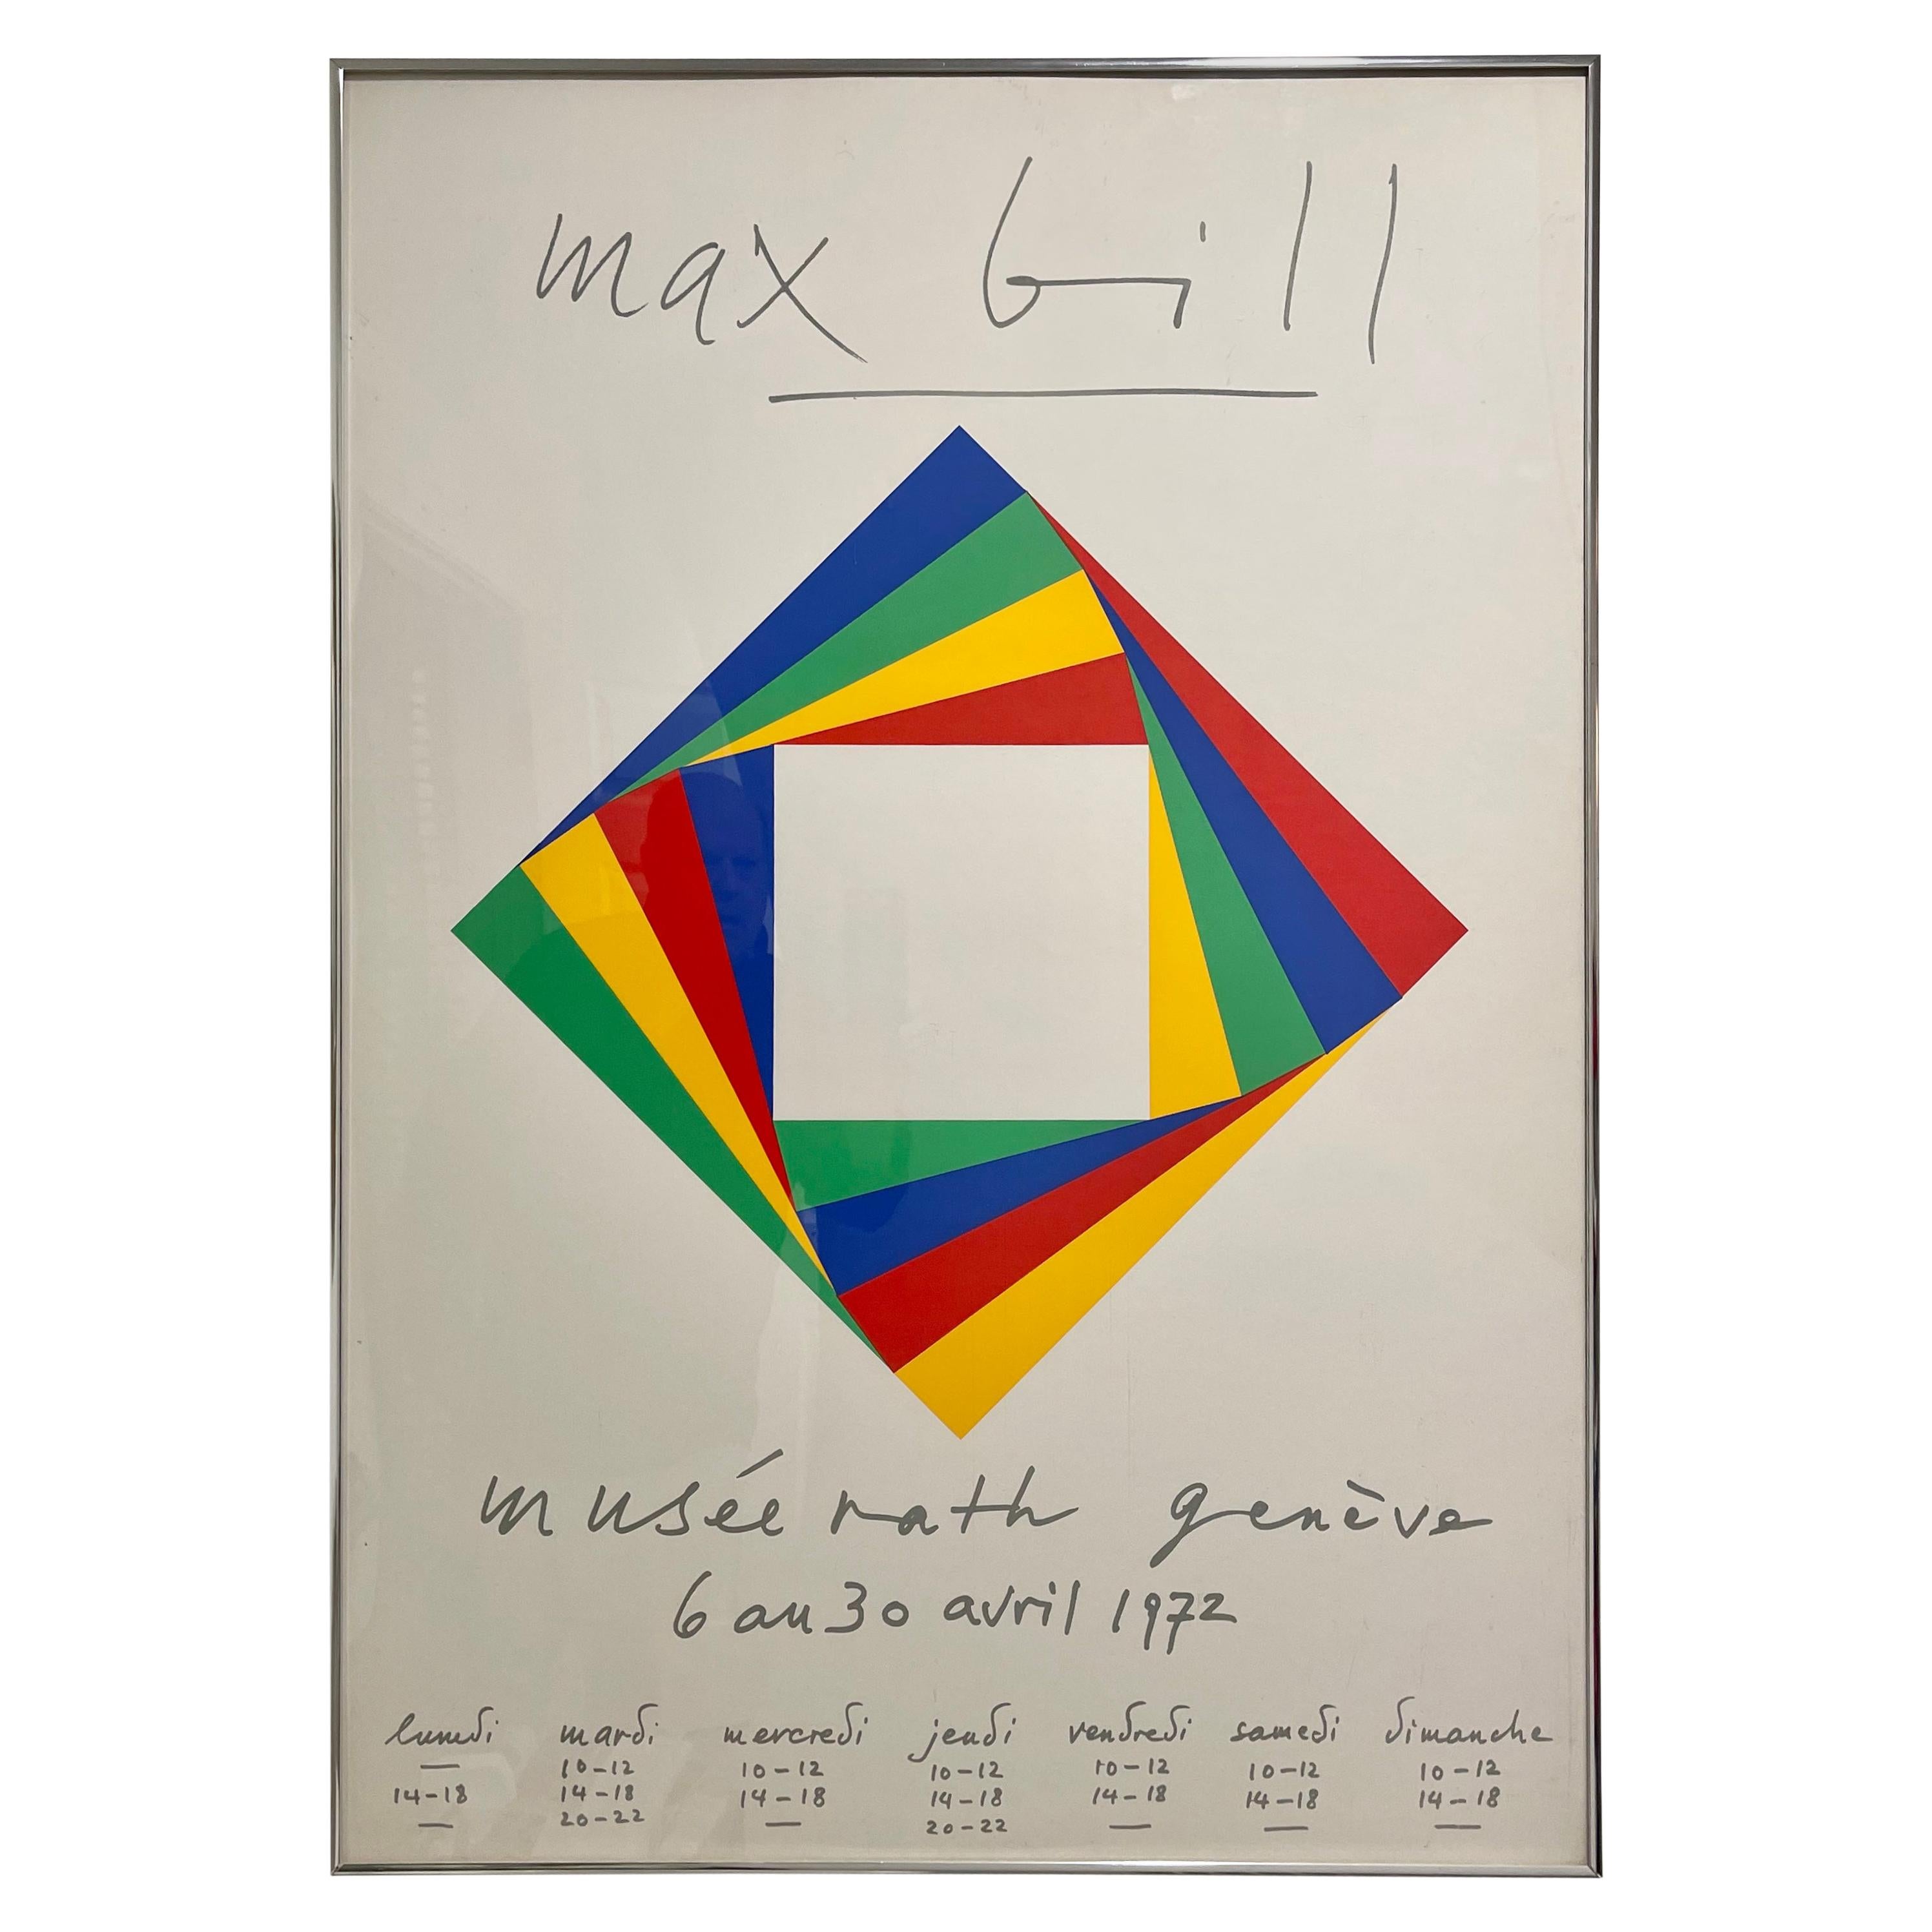 Max Bill Geneve Musee Serigraph, 1972 For Sale